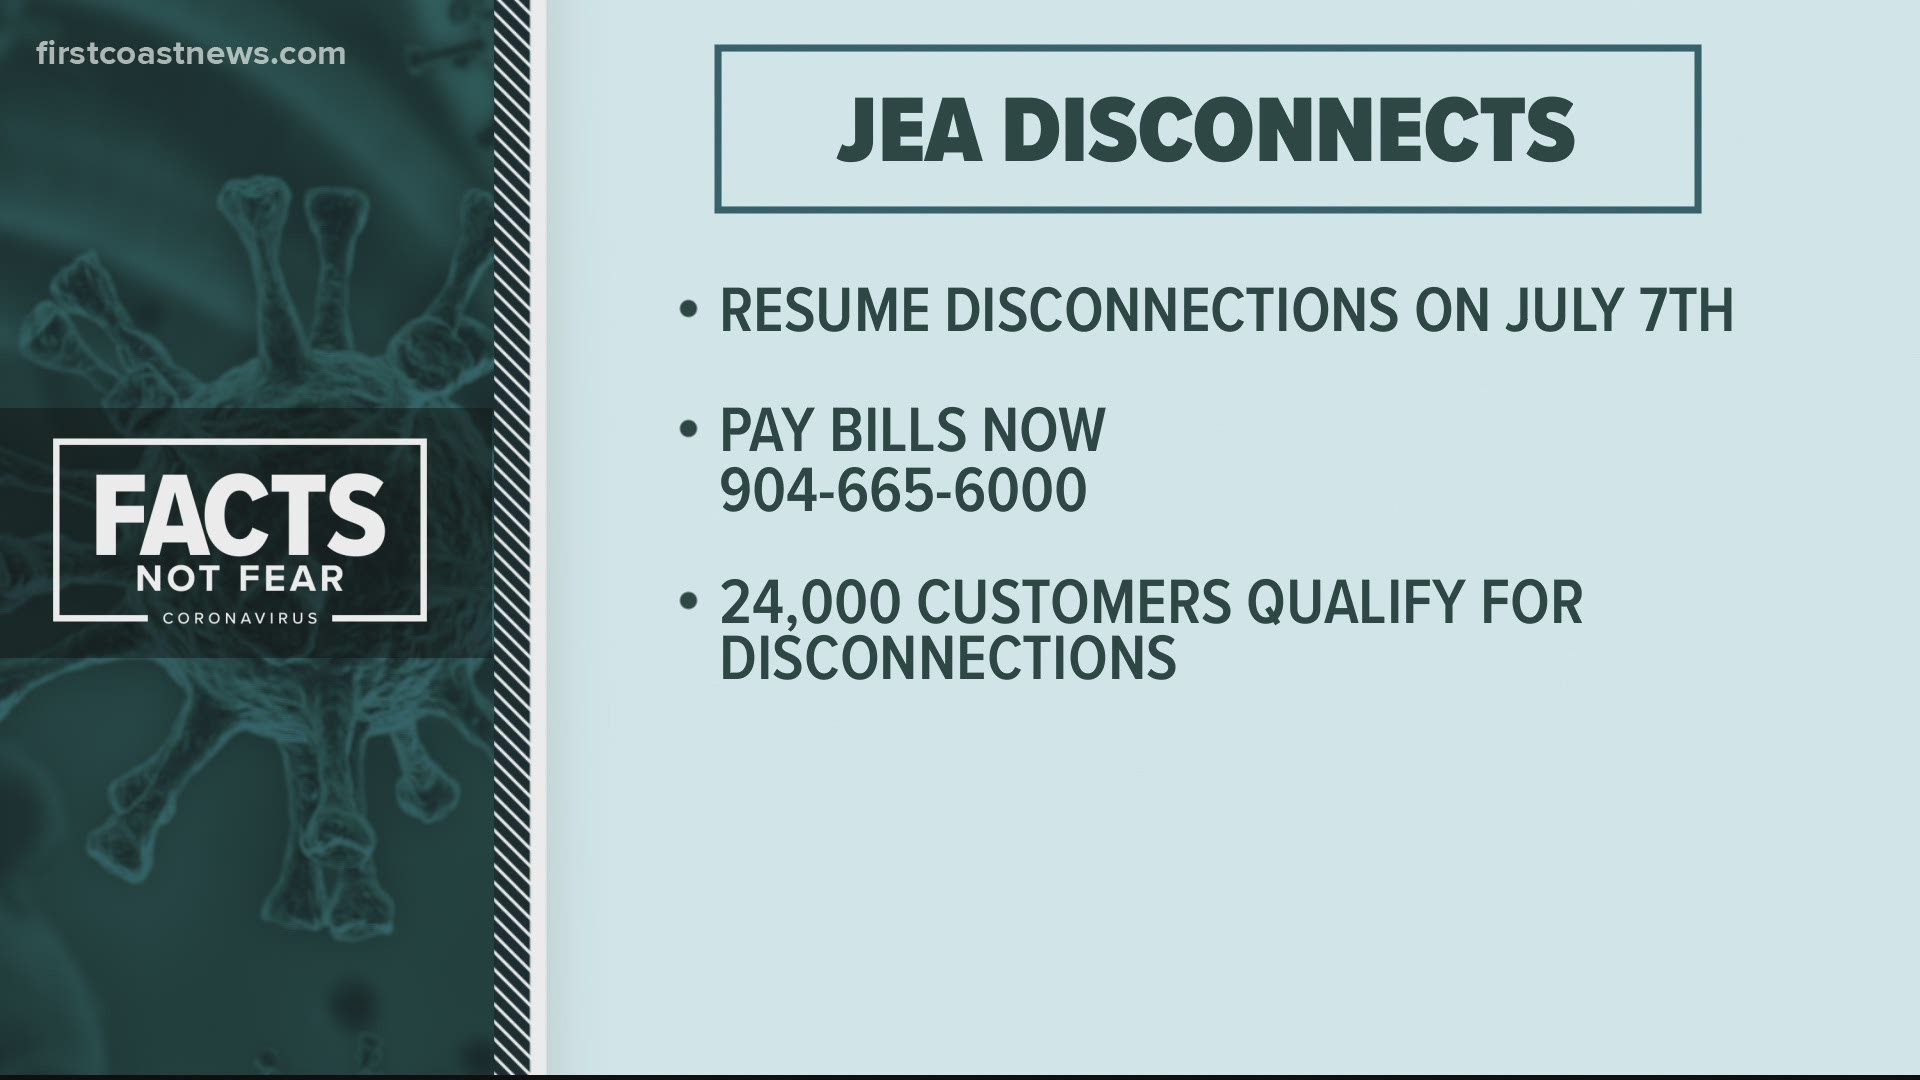 More than 24,000 JEA customers with delinquent utility bills are slated for disconnection starting next month.